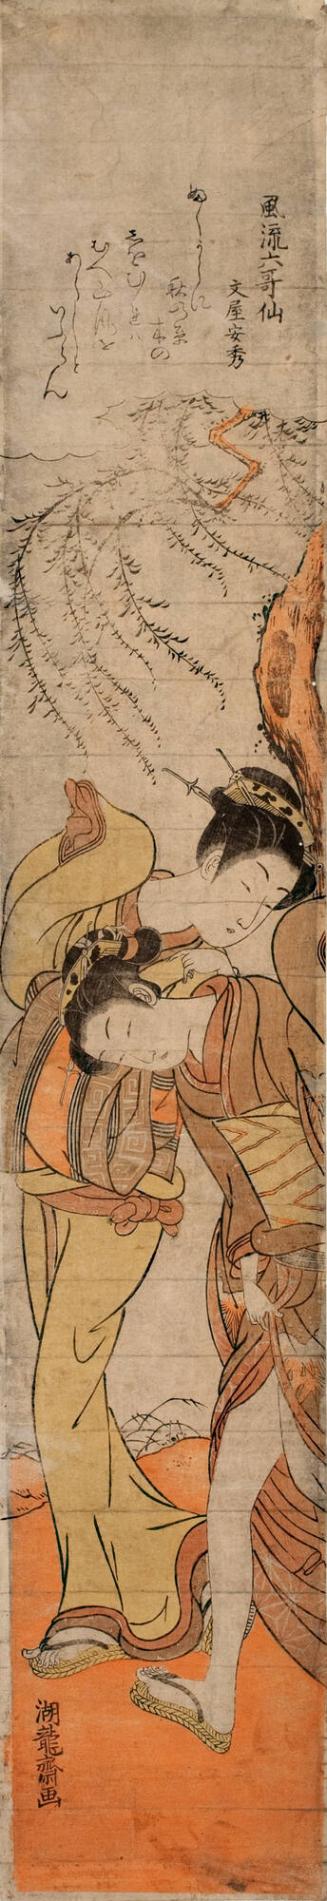 Two Women in a Summer Breeze (Illustration of a Poem by Bunya no Yasuhide), from the series The Elegant Immortal Poets